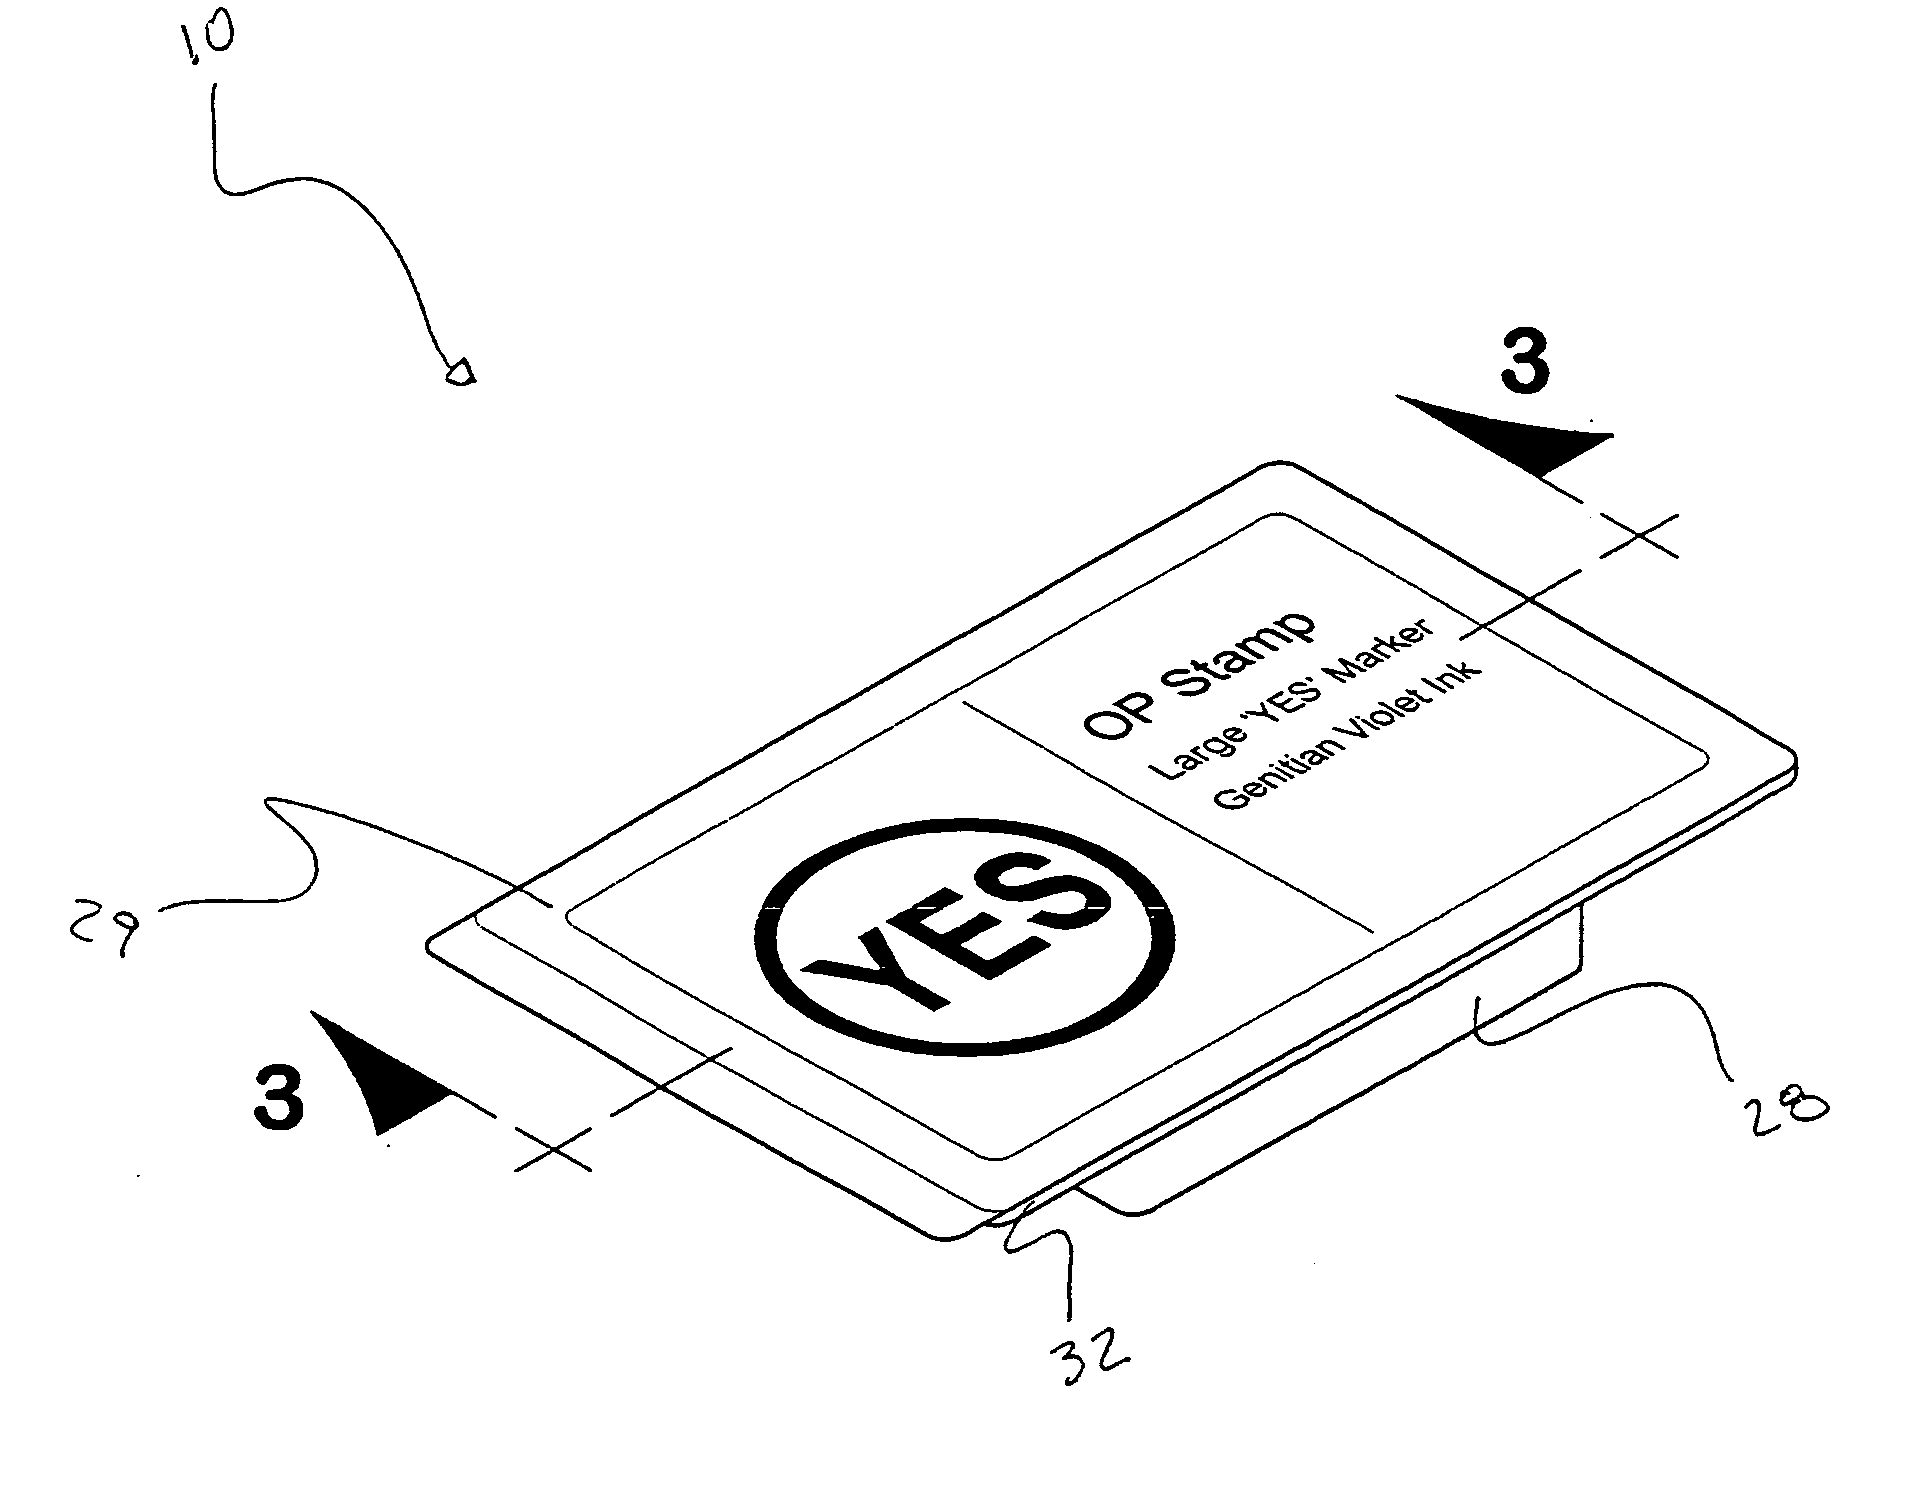 Surgical site marking assembly and method of using same